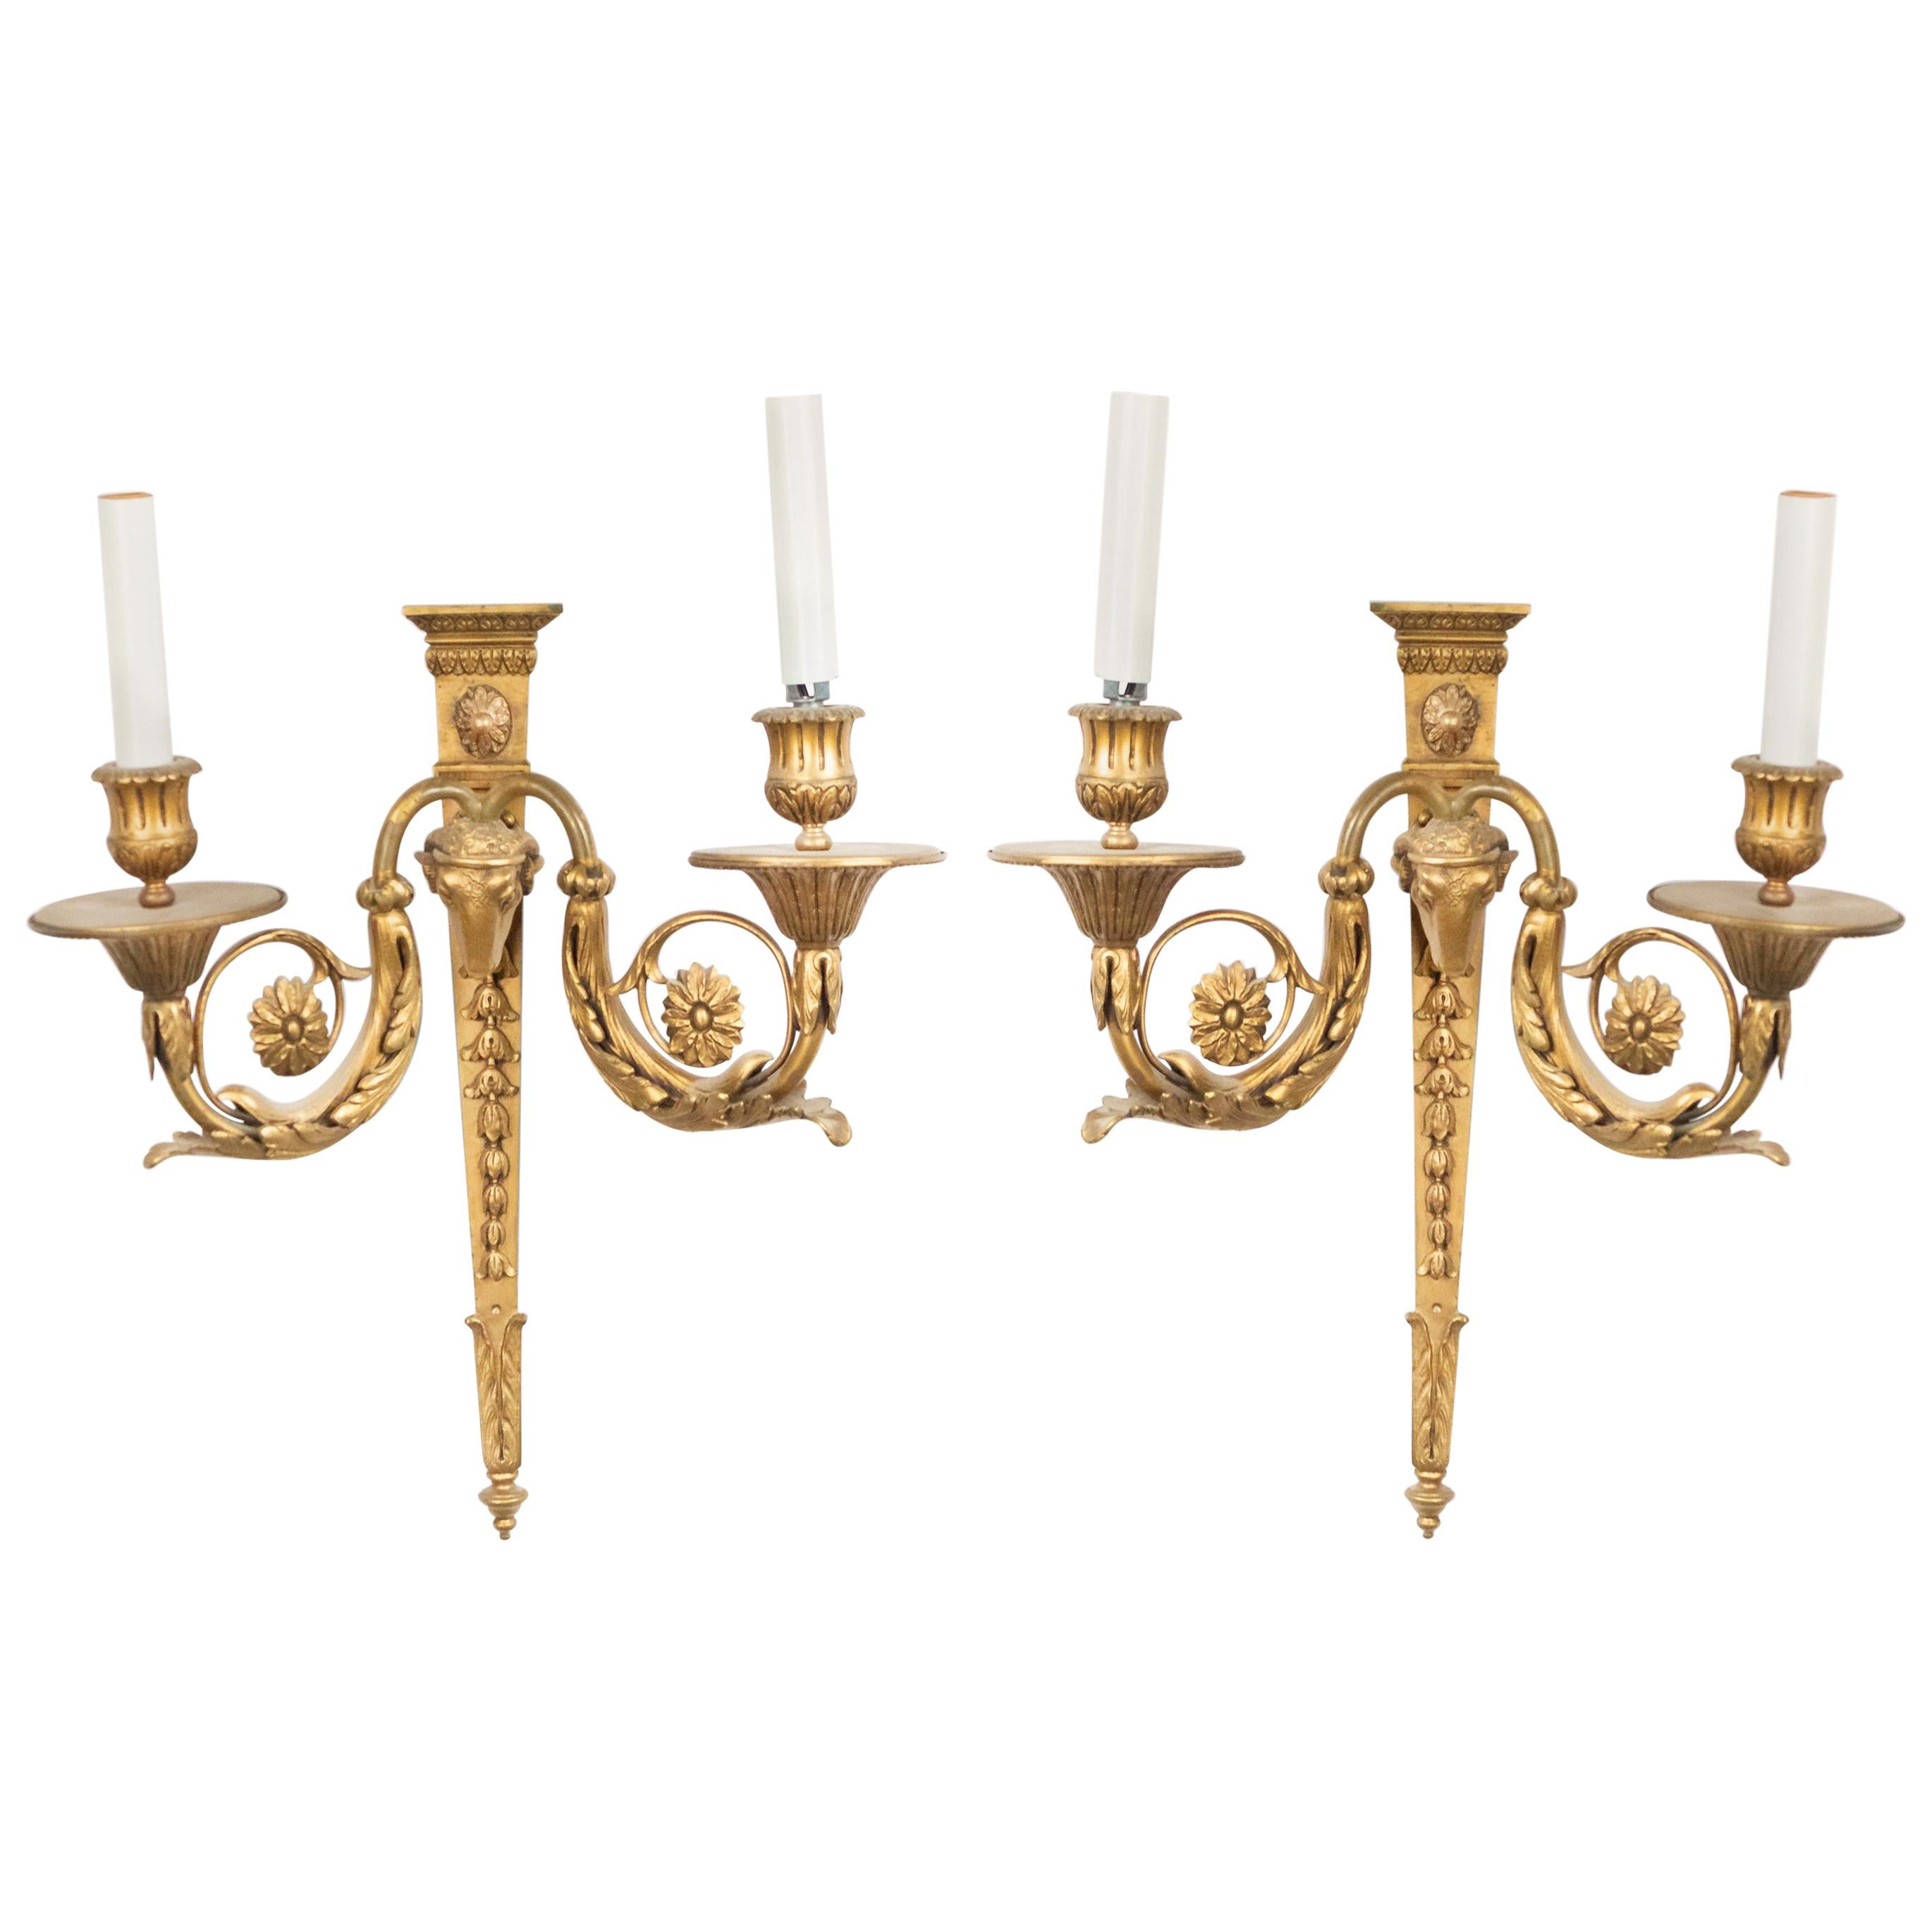 Pair of English Adam-style (19/20th Century) bronze dore wall sconces with two scroll arms and ram's head design. (PRICED AS Pair)
